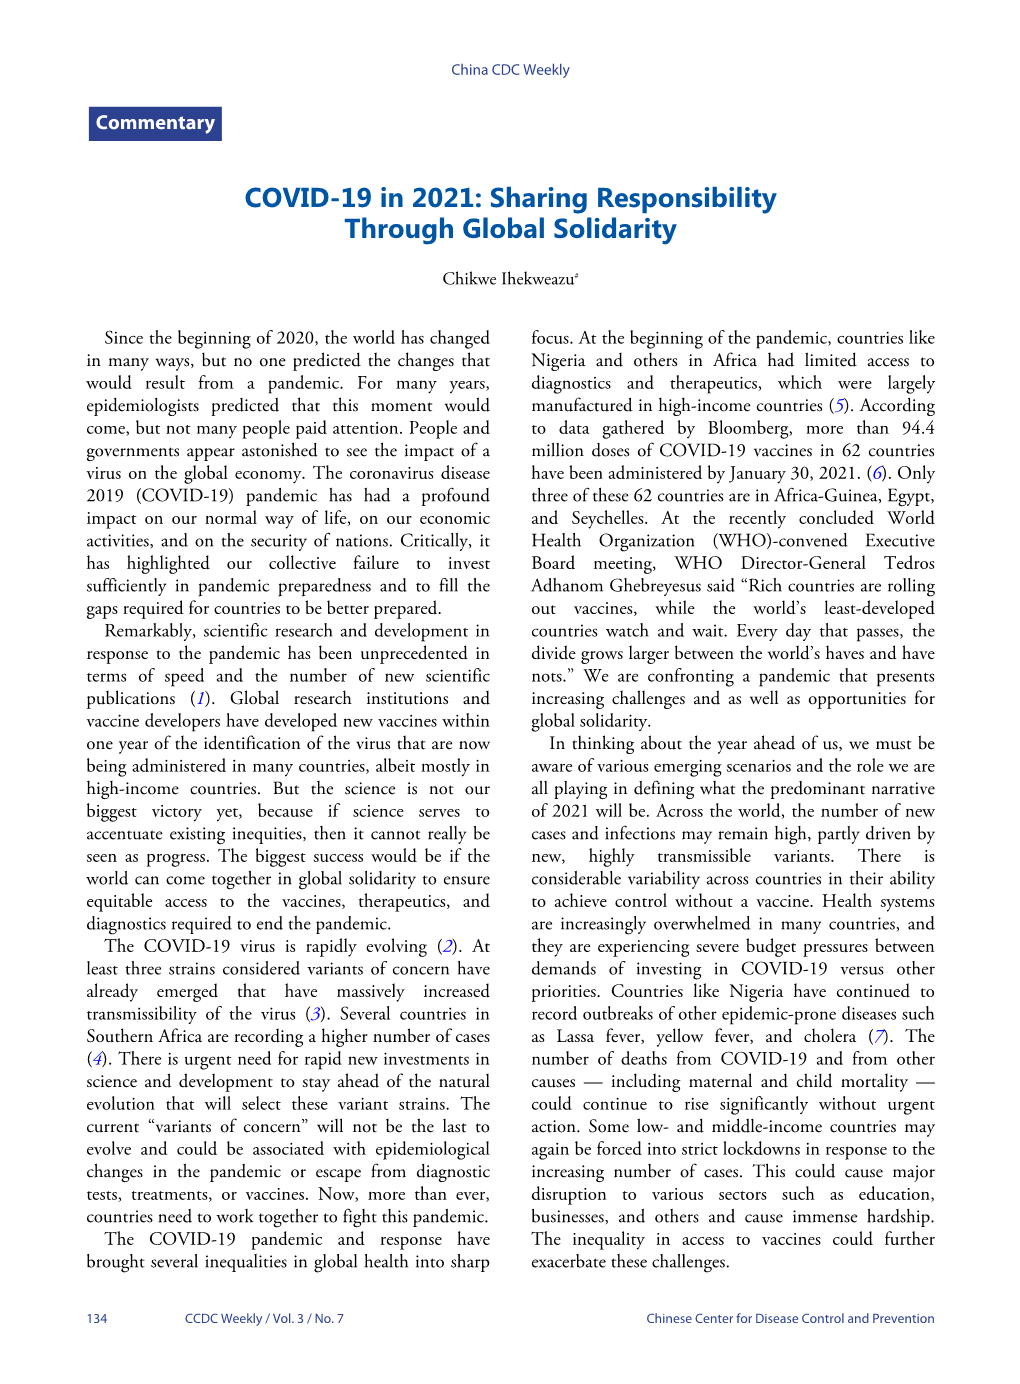 COVID-19 in 2021: Sharing Responsibility Through Global Solidarity